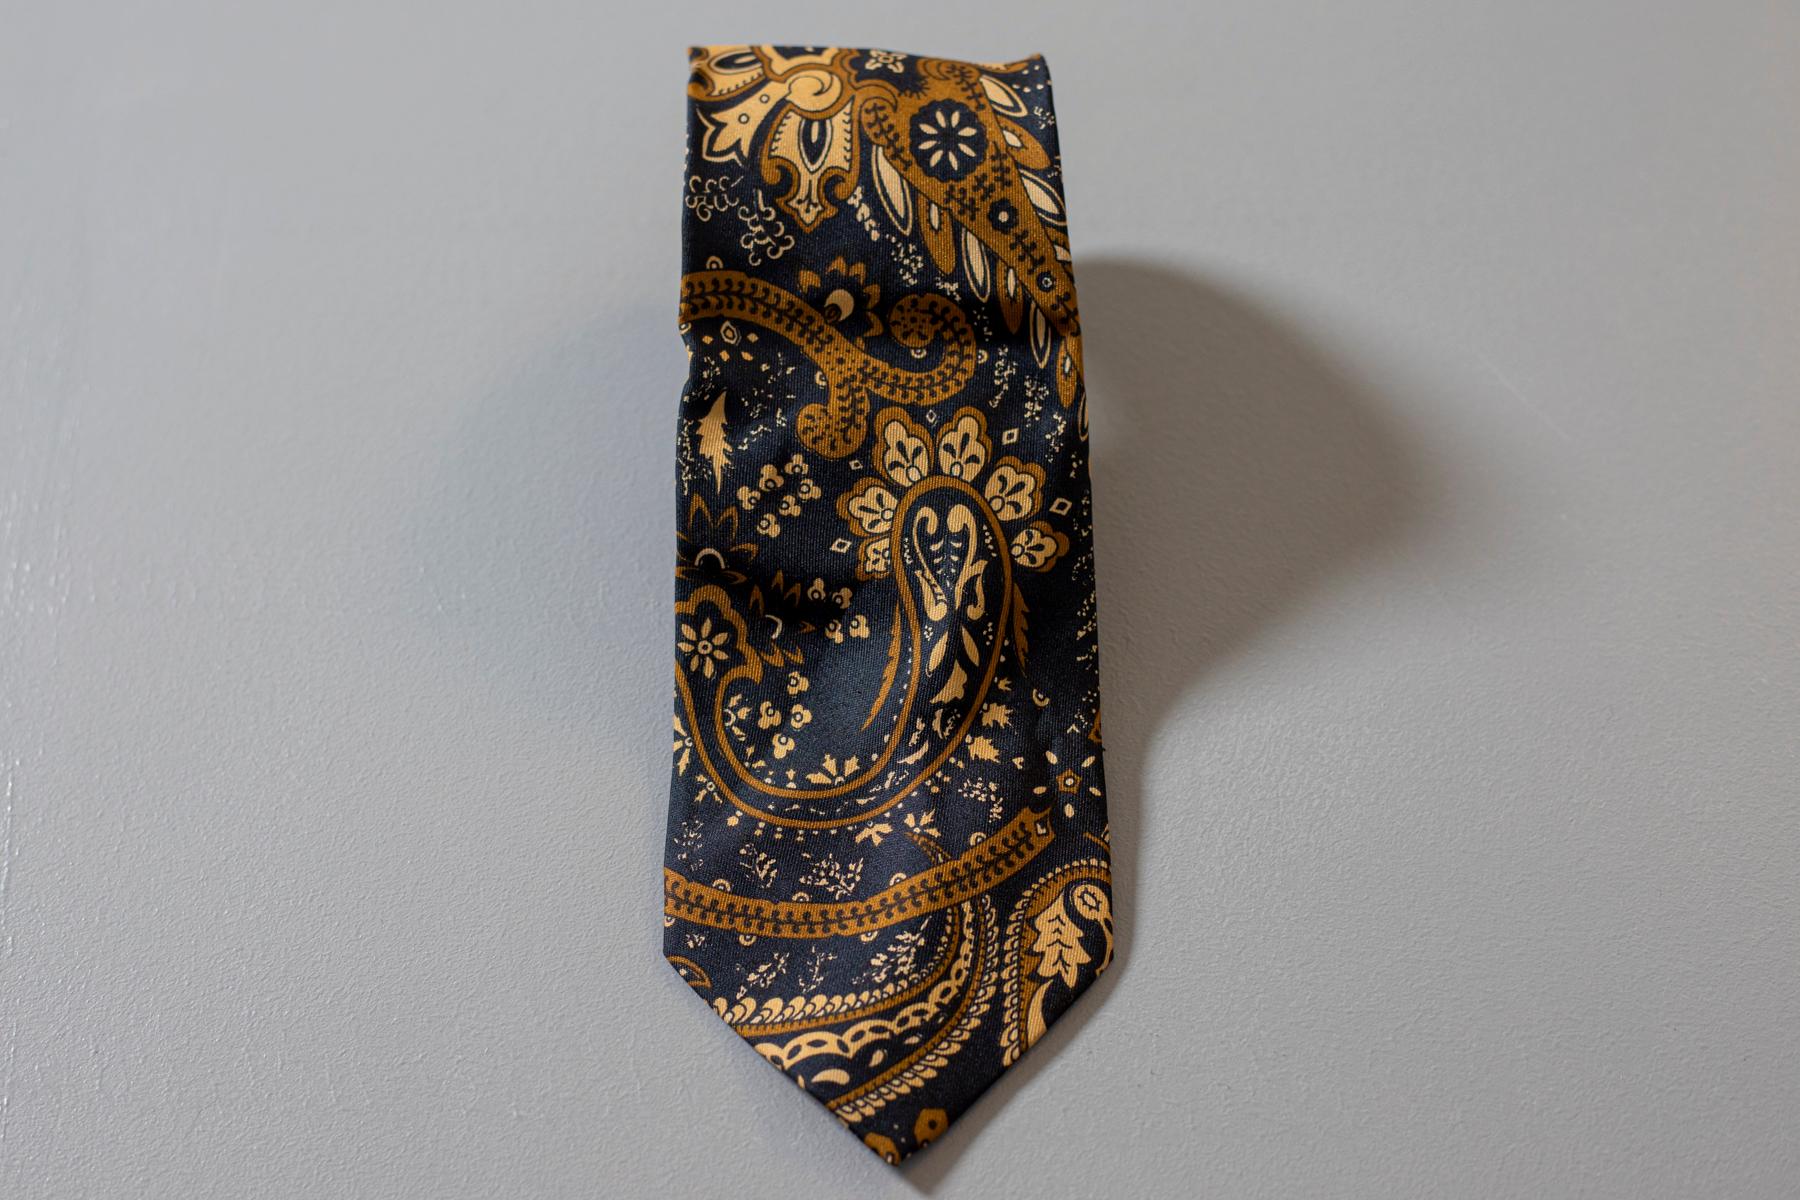 Vintage Mario Ferrari tie, It is made of 100% silk, with yellow and brown paysley motifs on a blue background.
This model of tie, thanks to its very particular pattern, will make your style unique and original. Ideal for an informal evening with